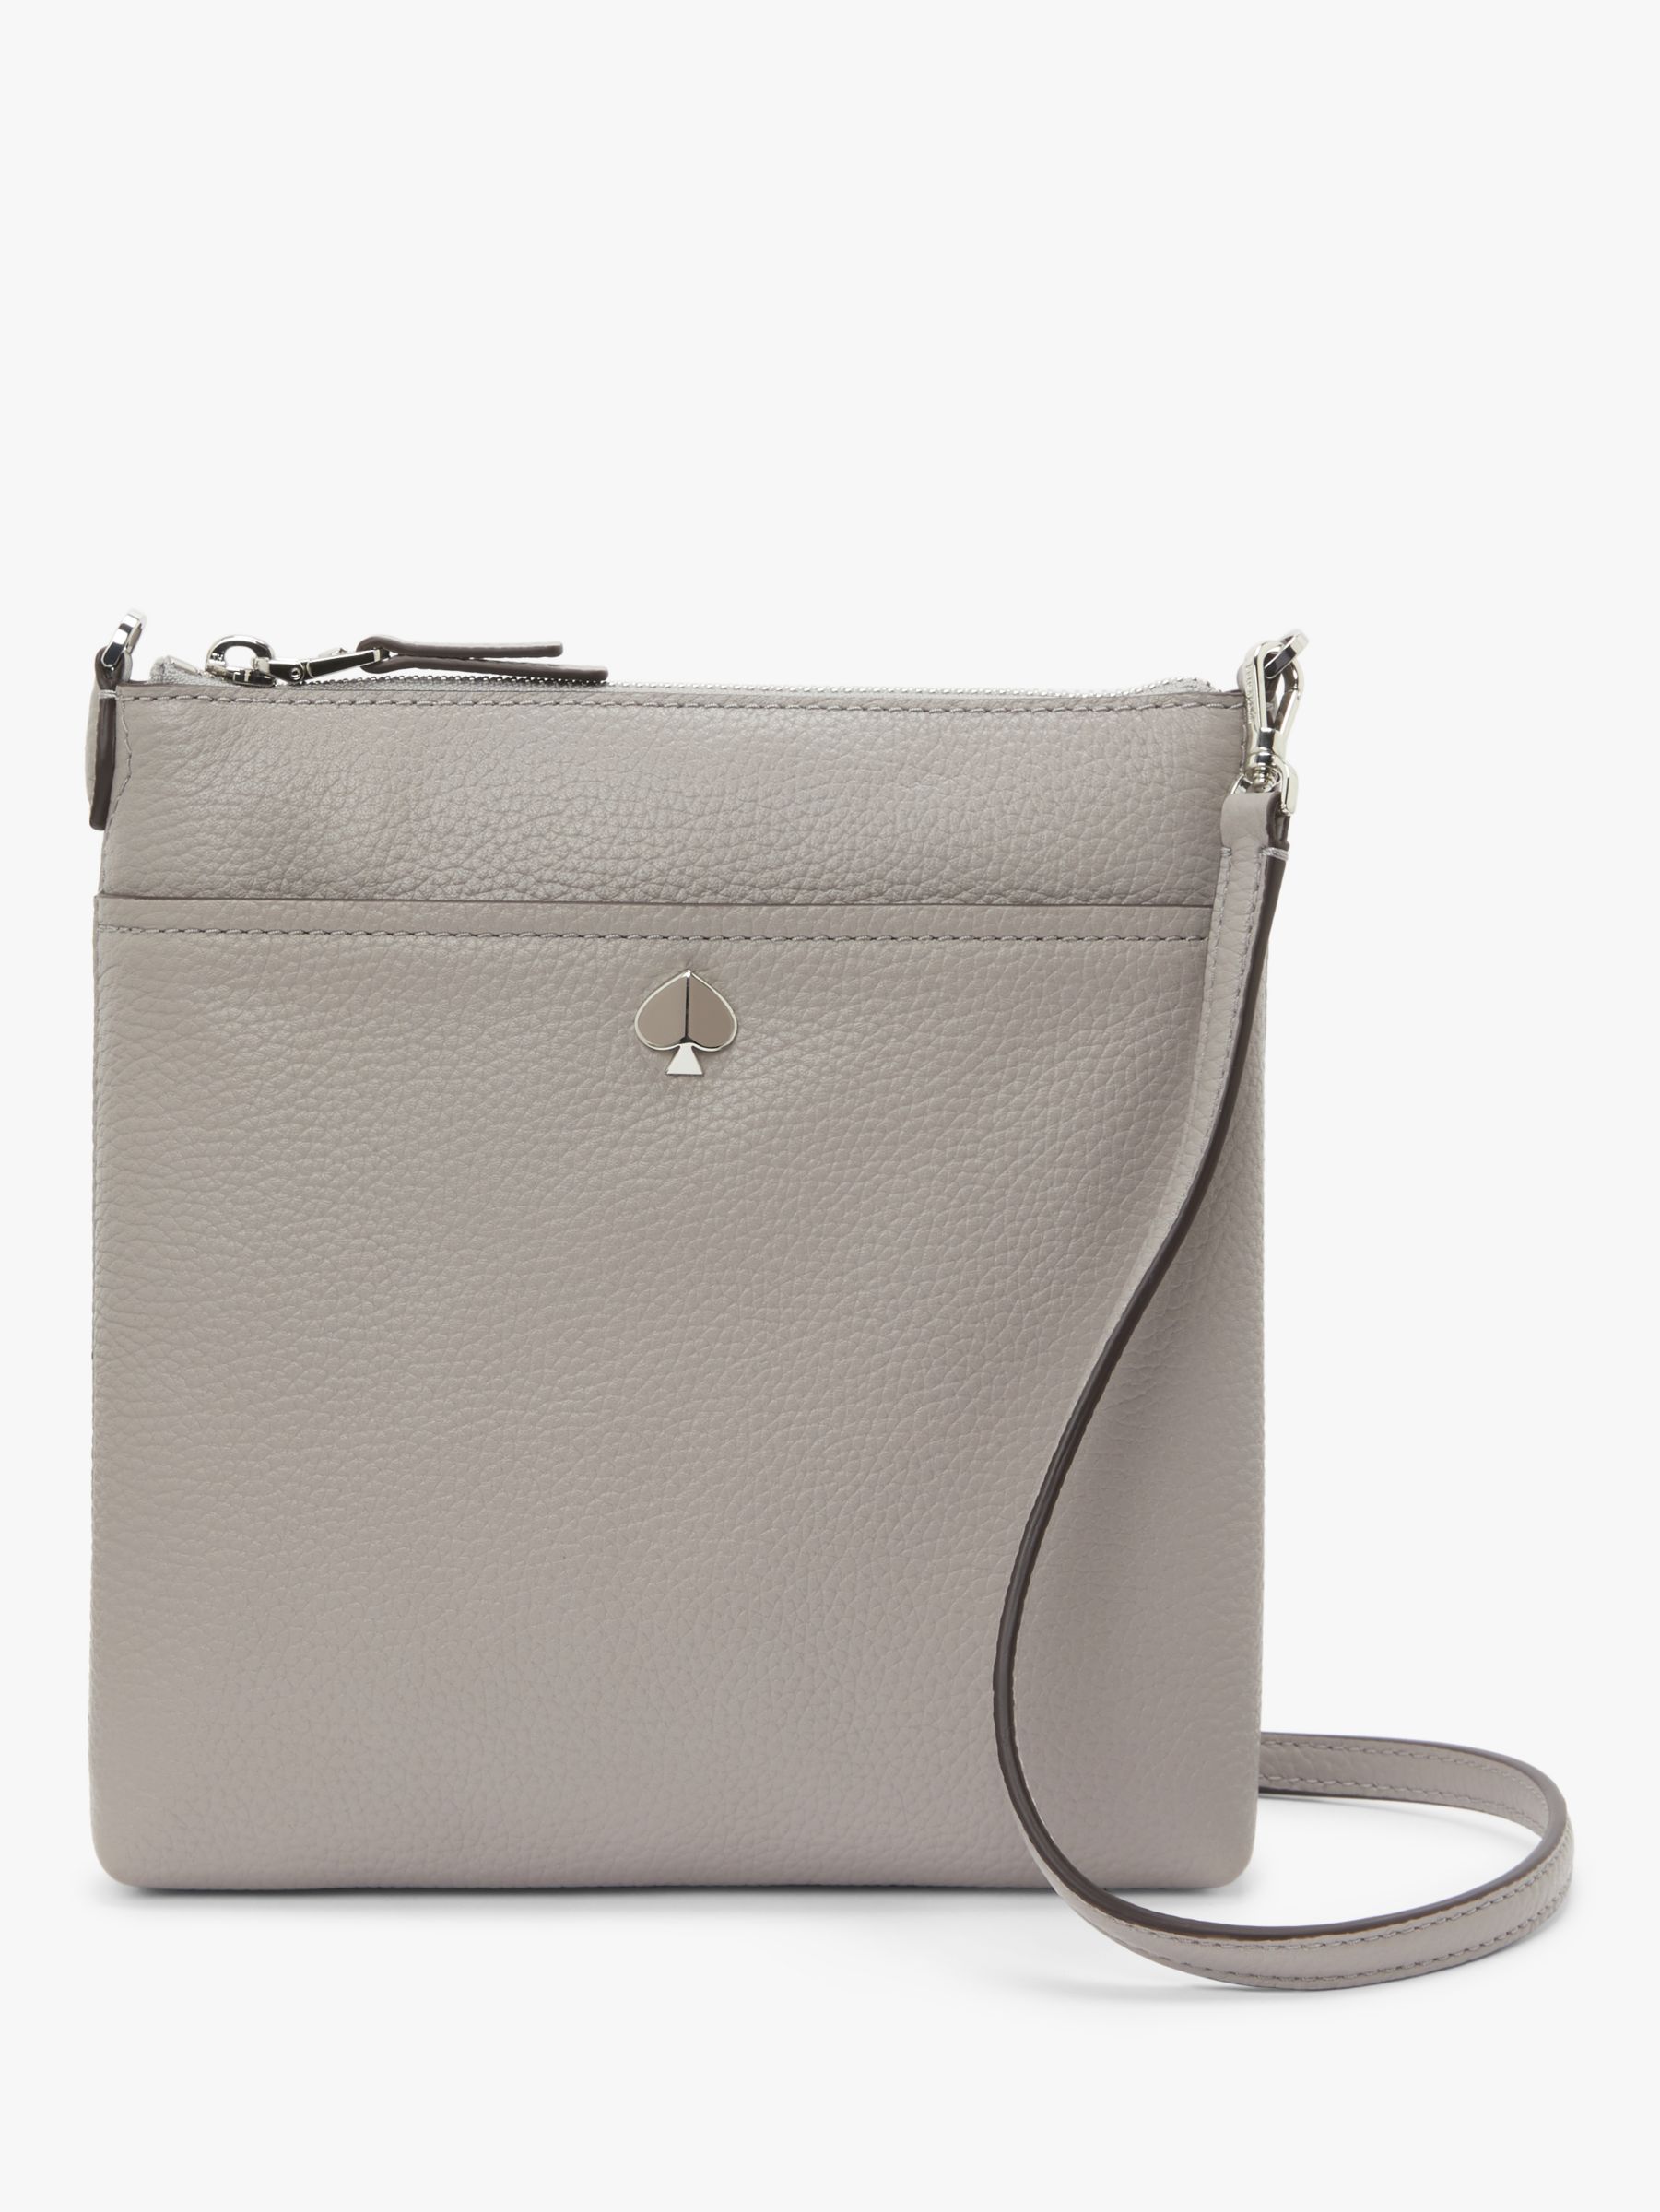 kate spade new york Polly Leather Small Cross Body Bag at John Lewis & Partners